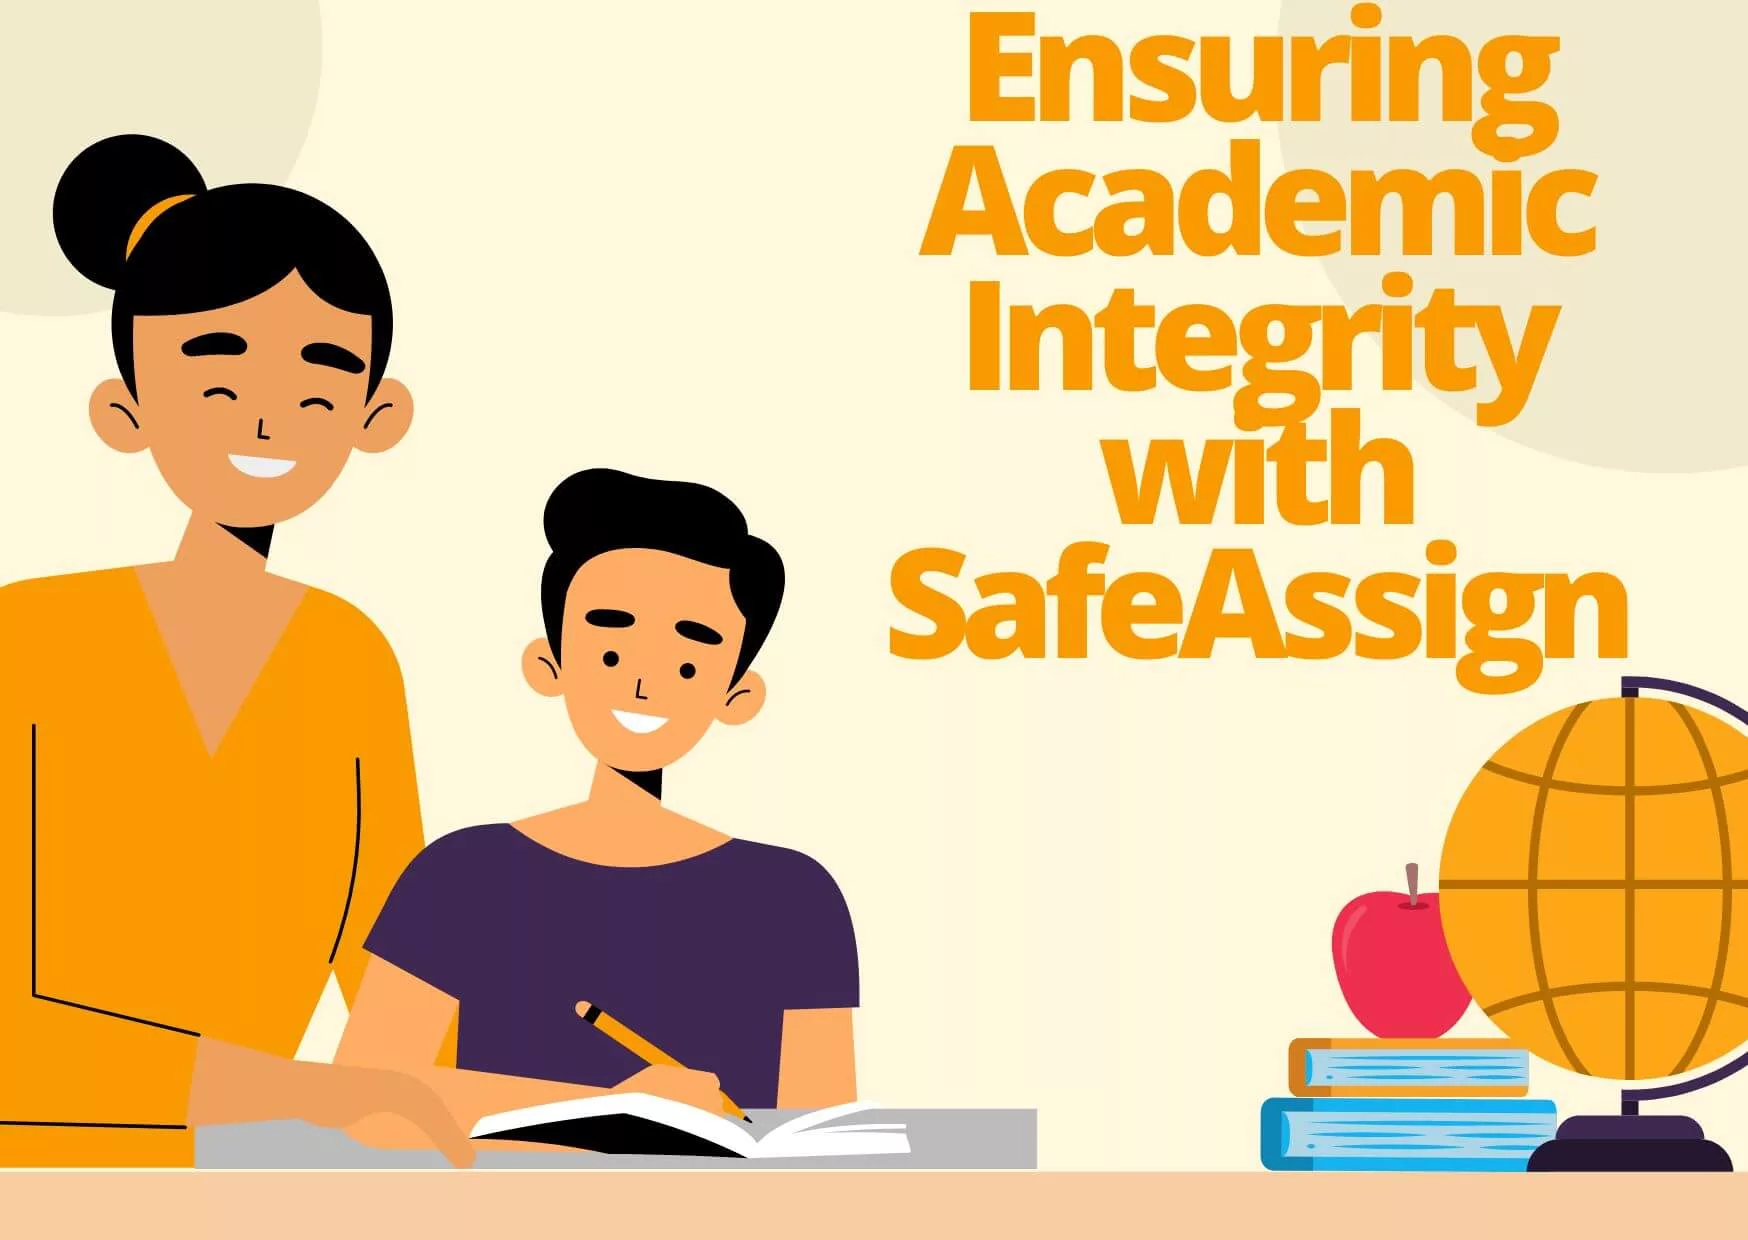 Ensuring Academic Integrity with SafeAssign